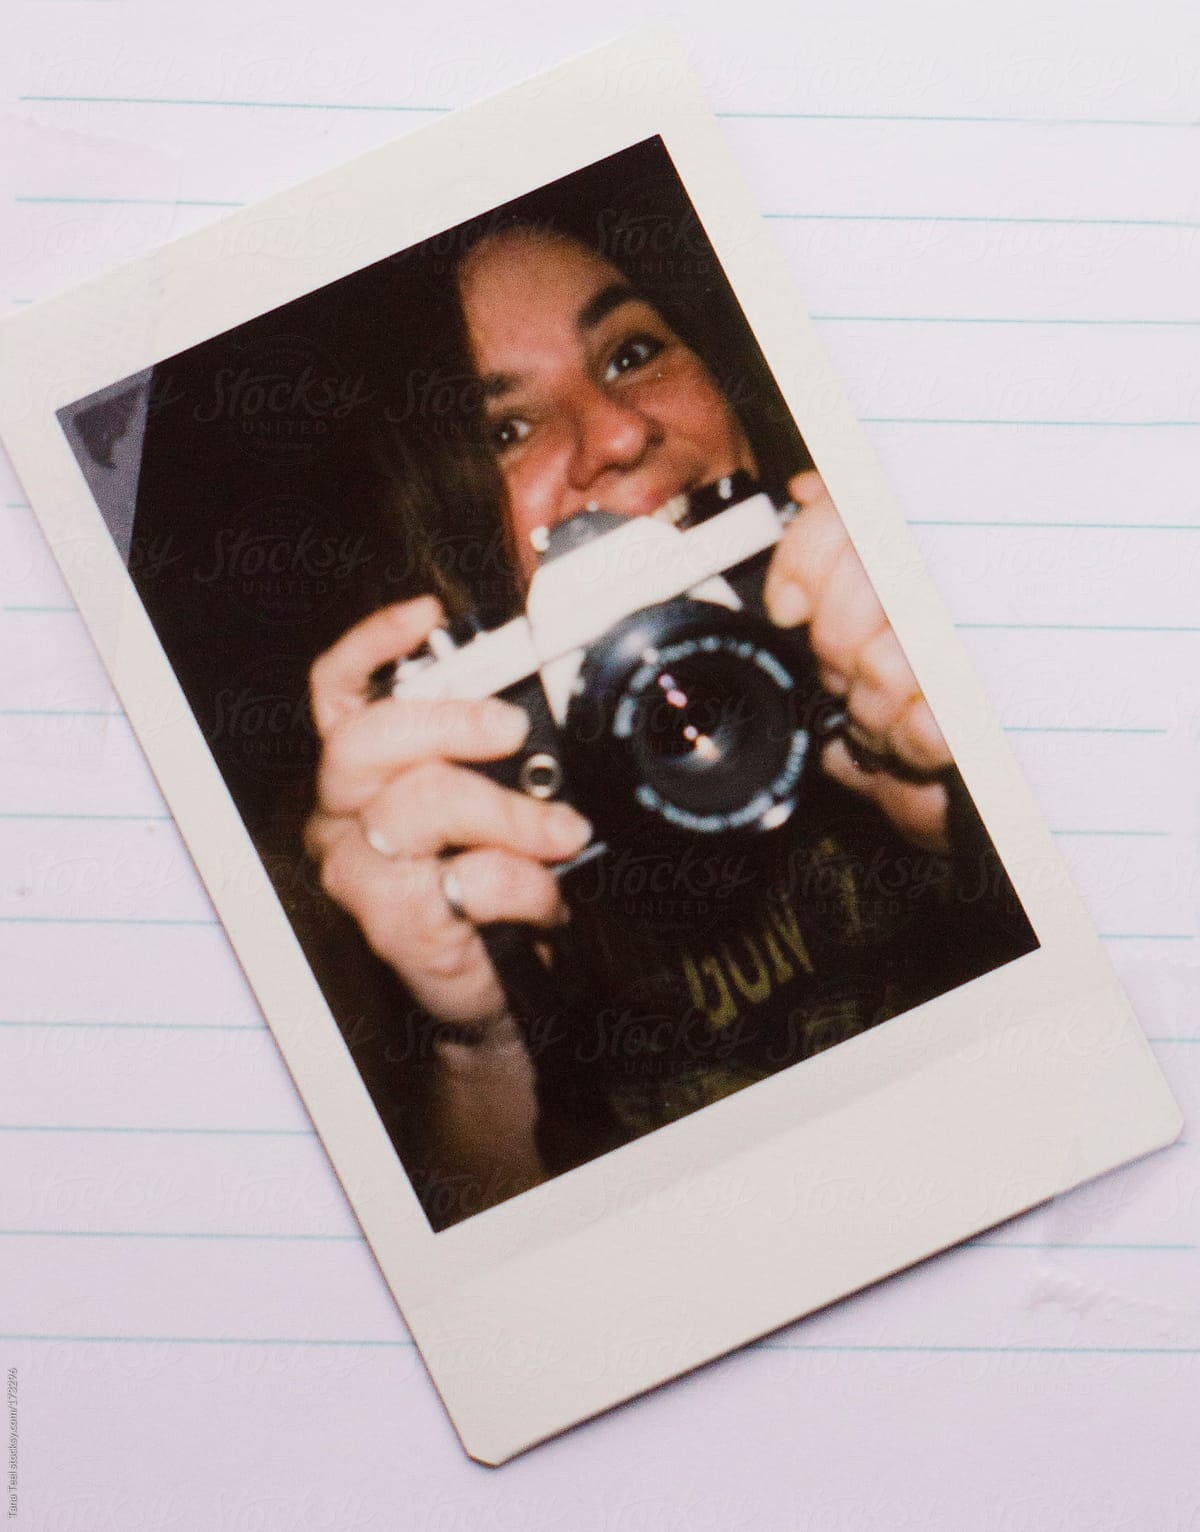 A mini polaroid of a smiling photographer placed on notebook paper